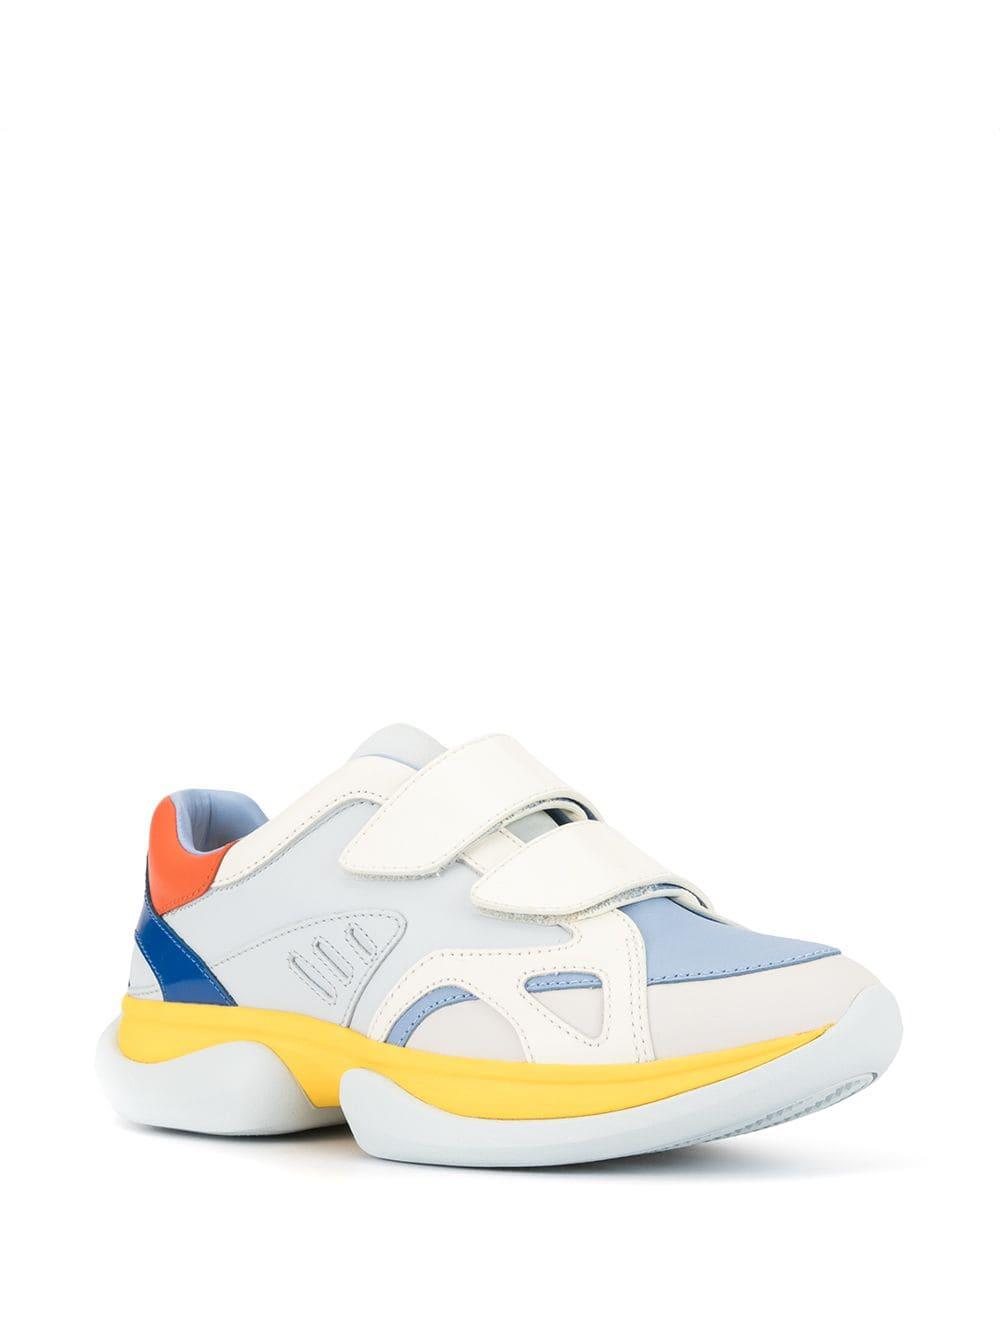 Tory Burch Leather Bubble Double Strap Sneakers - Lyst